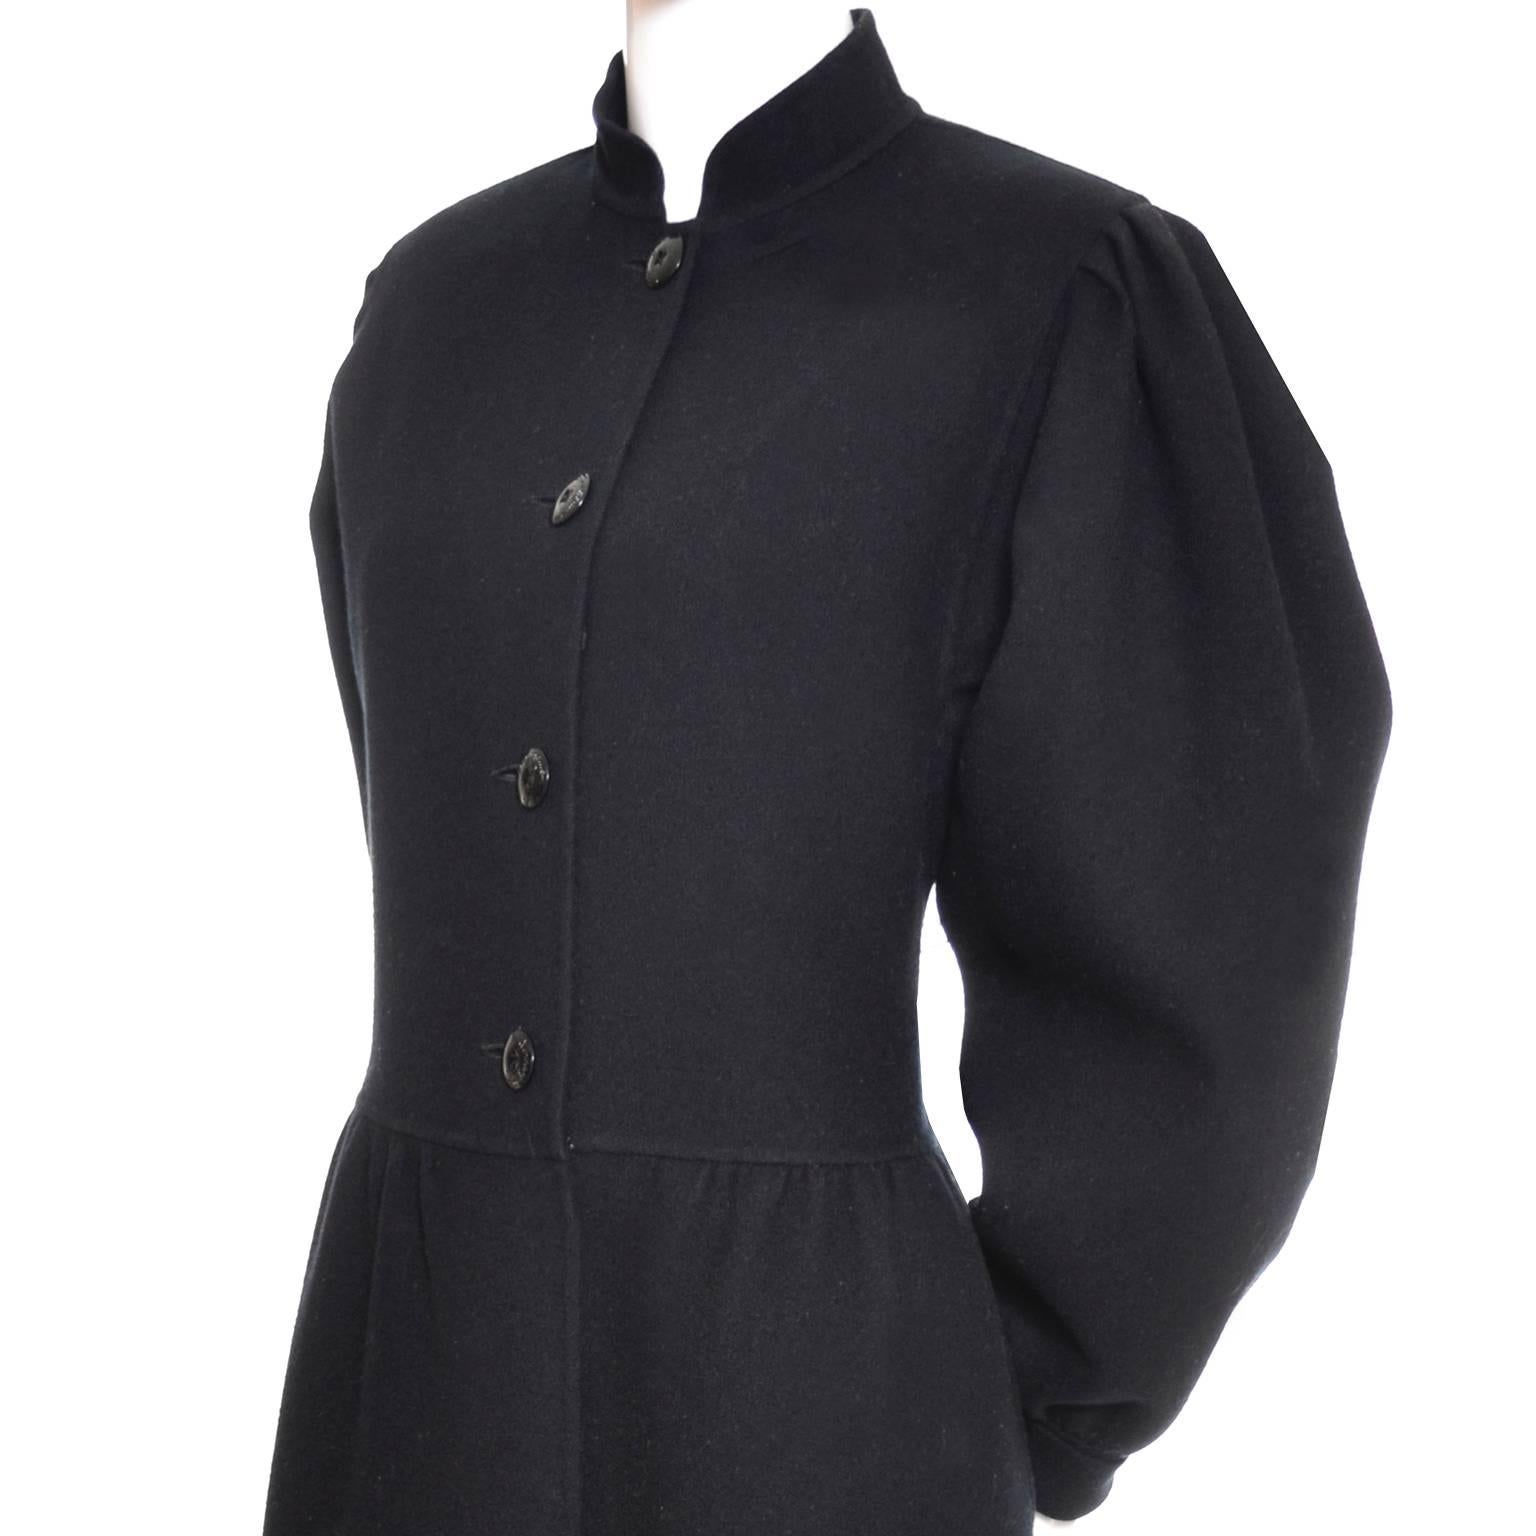 This is a wonderful vintage black wool coat dress from Salvatore Ferragamo.  This could be worn as a coat if you don't mind slipping it over your head.  I love the mandarin collar, and it is unlined with side pockets and great gathered sleeves. 